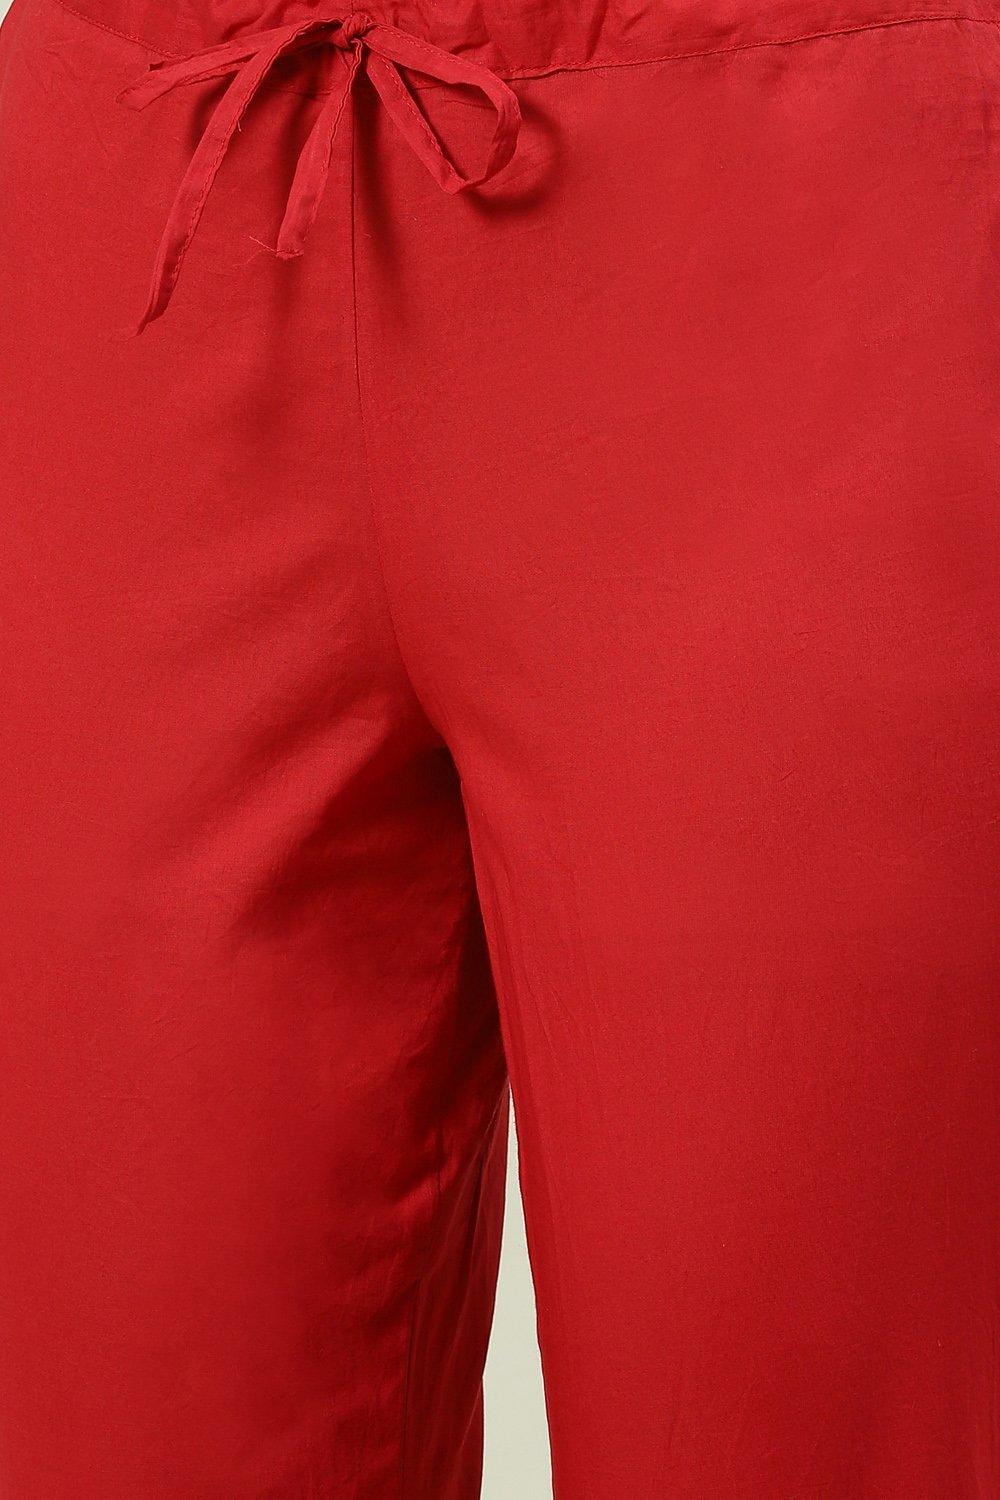 Buy Red Cotton Solid Pant (Pants) for INR899.00 | Biba India